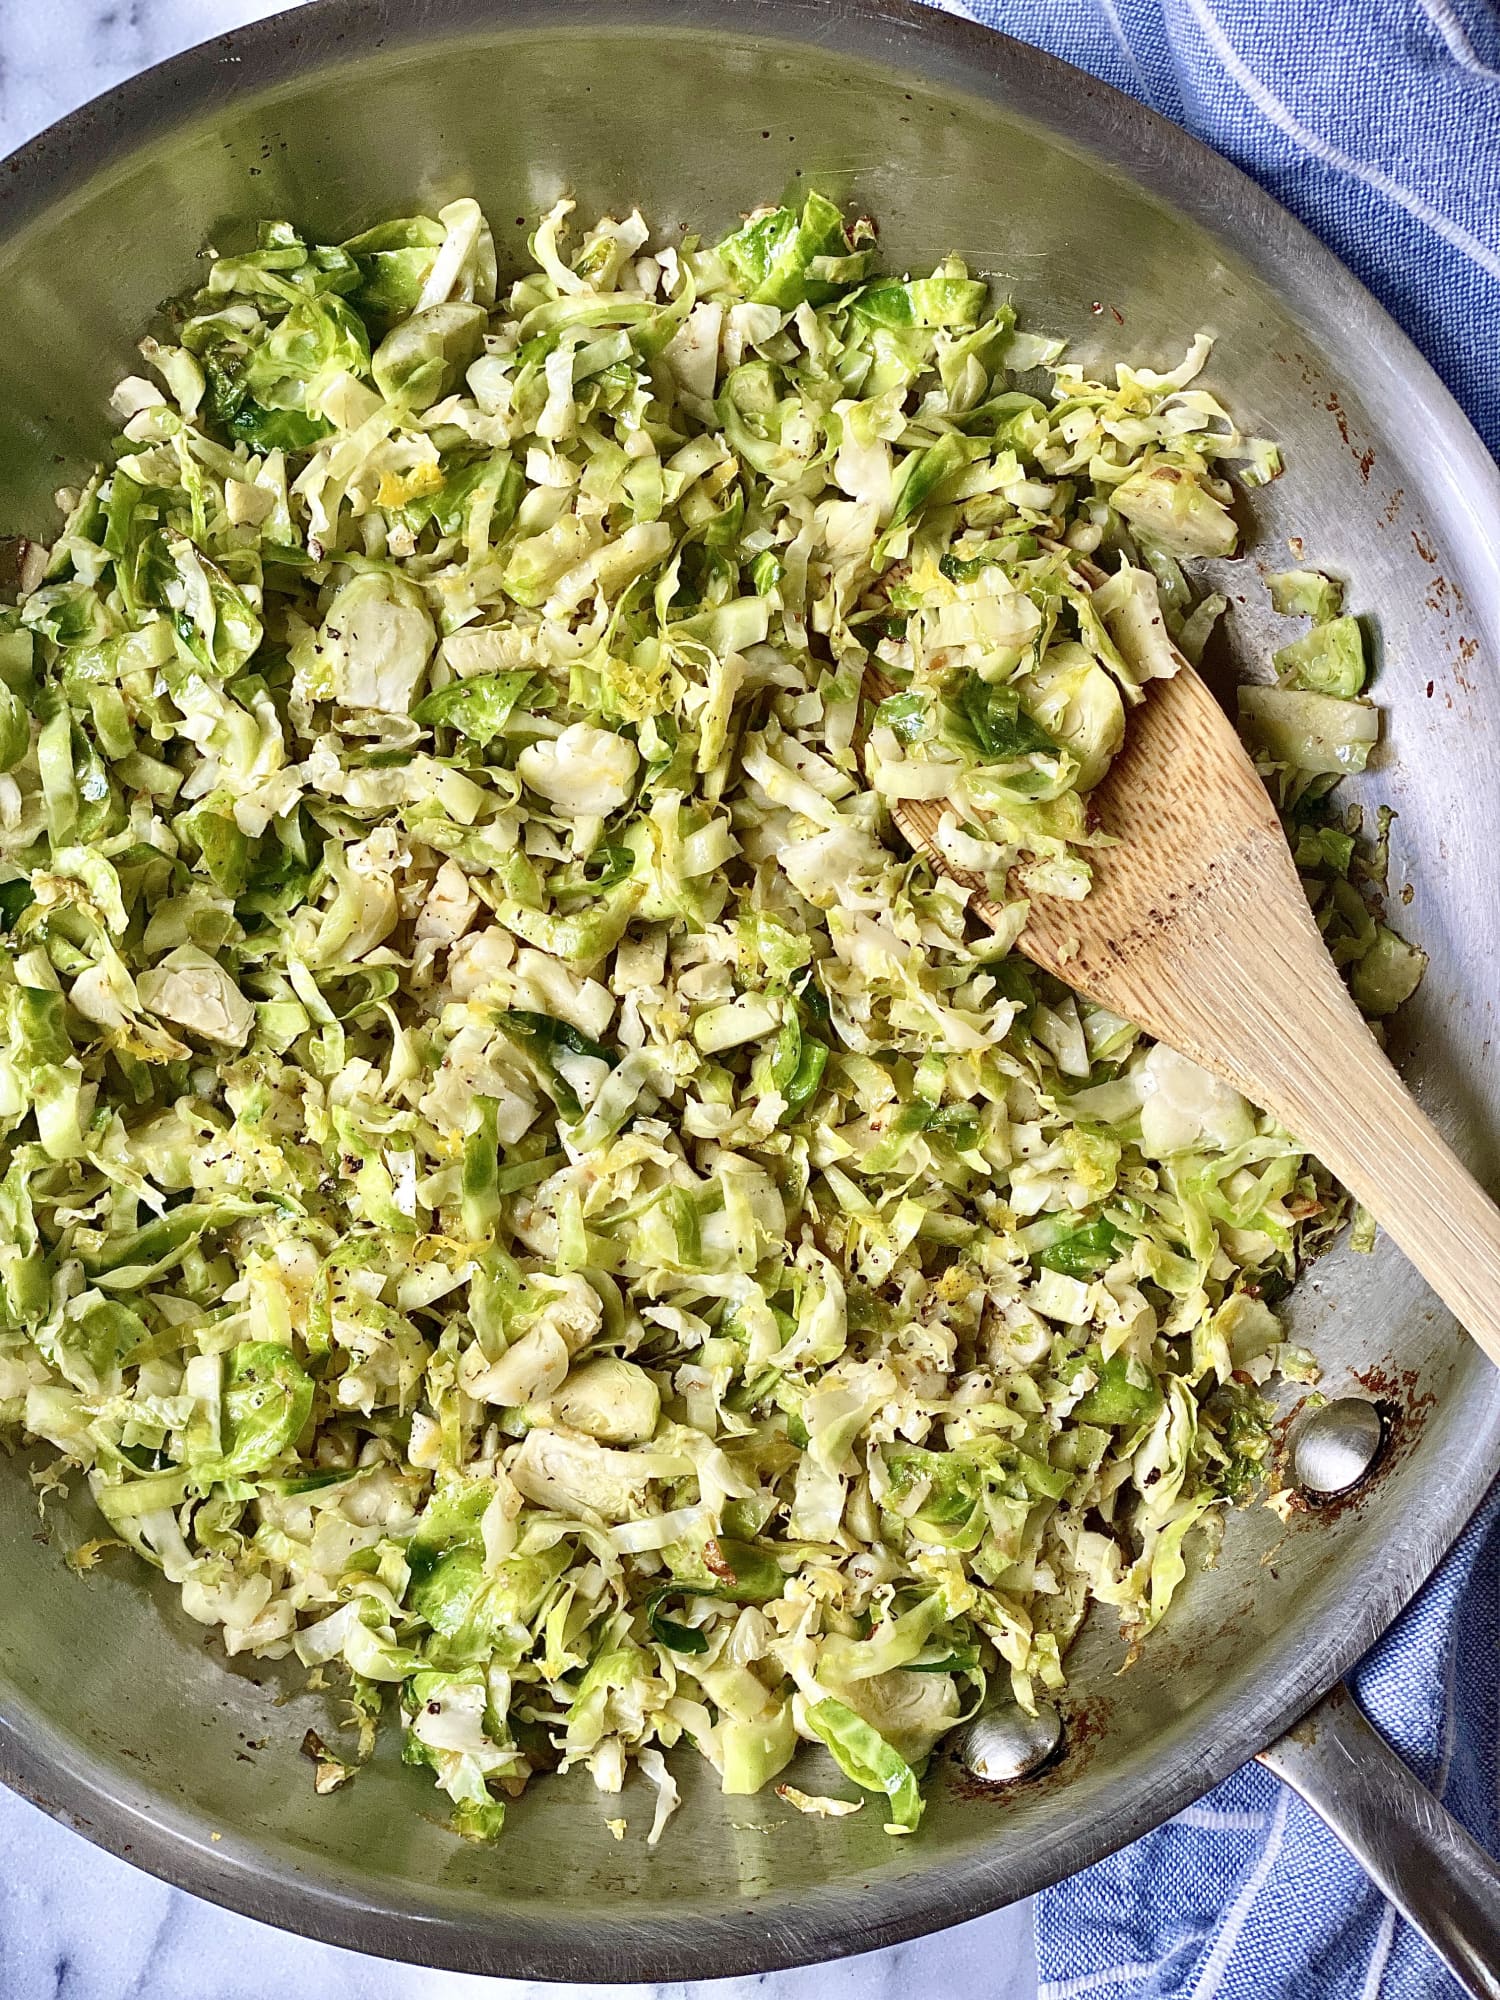 Lemony Shaved Brussels Sprouts Are Ready in Just 10 Minutes